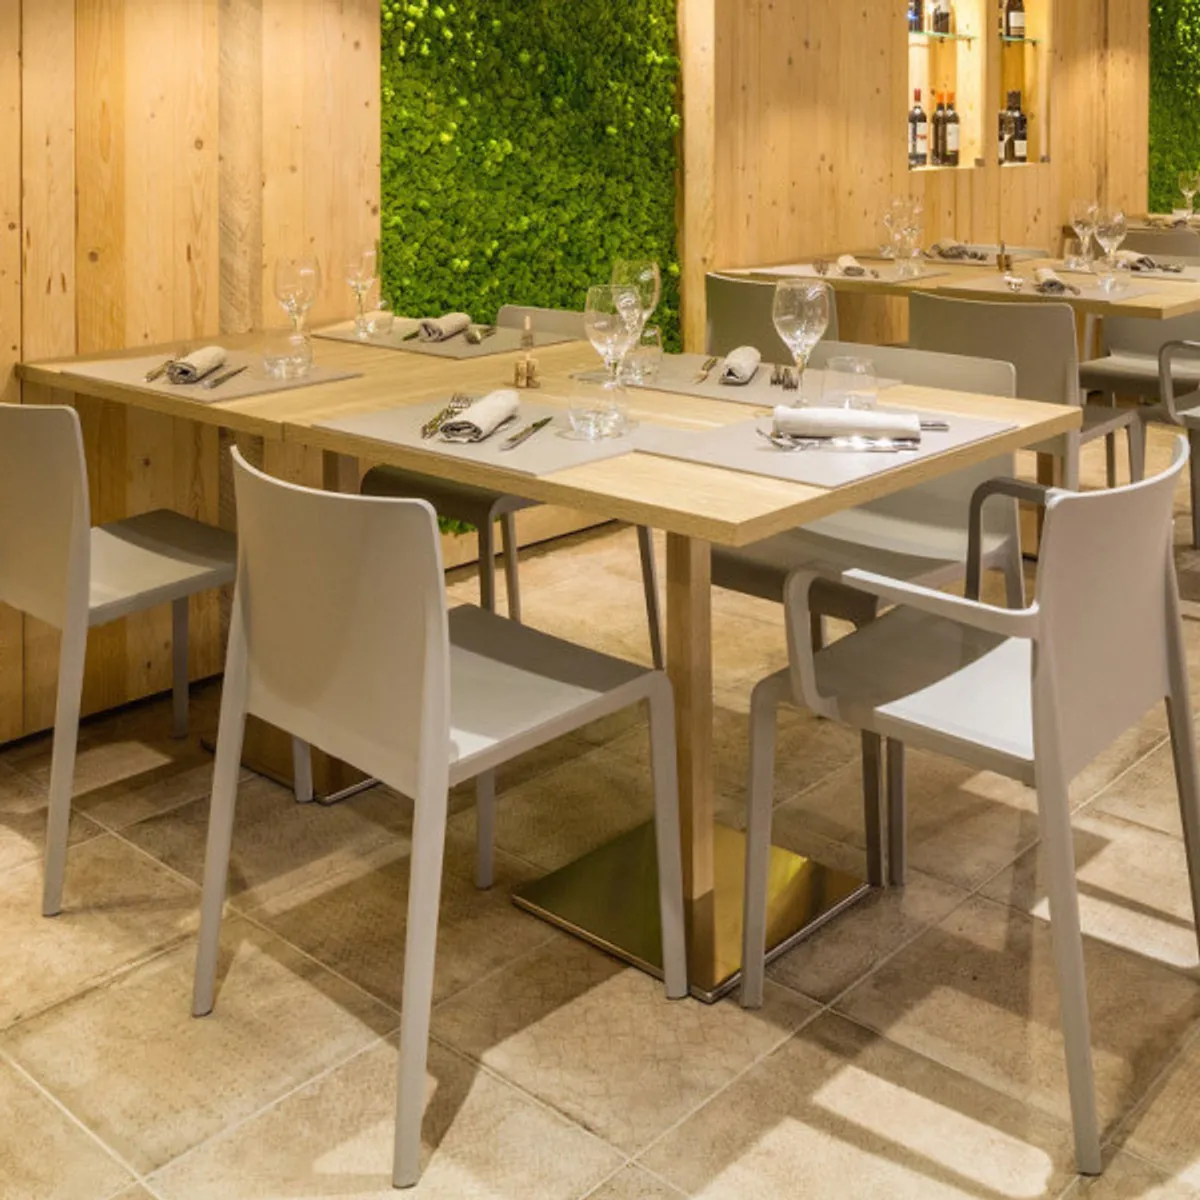 Ice-cube-table-base-with-wooden-column-Clubhouse-Giarrizzo-restaurant3